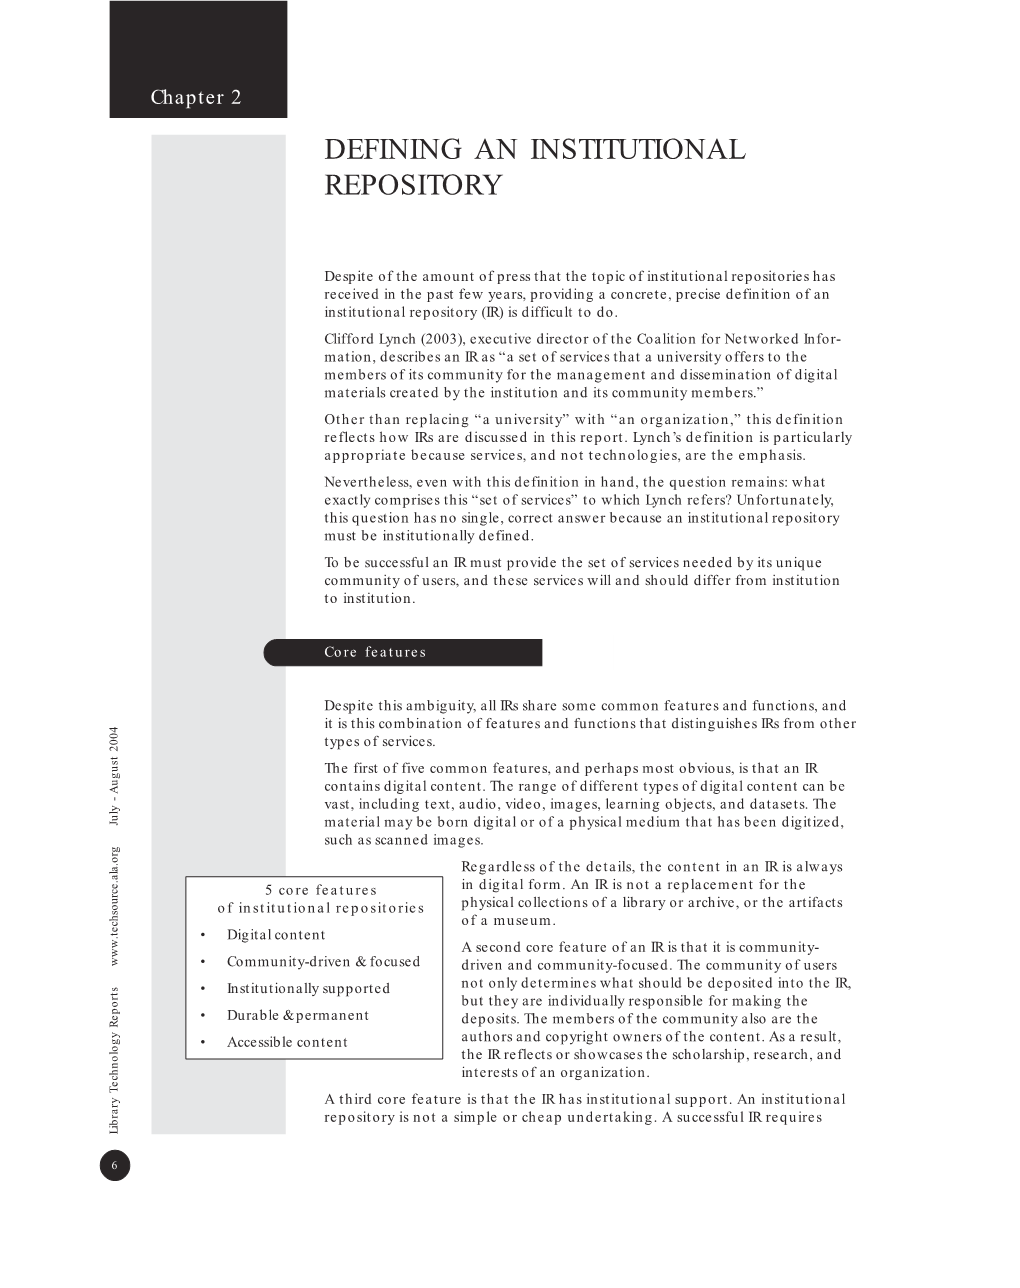 Defining an Institutional Repository